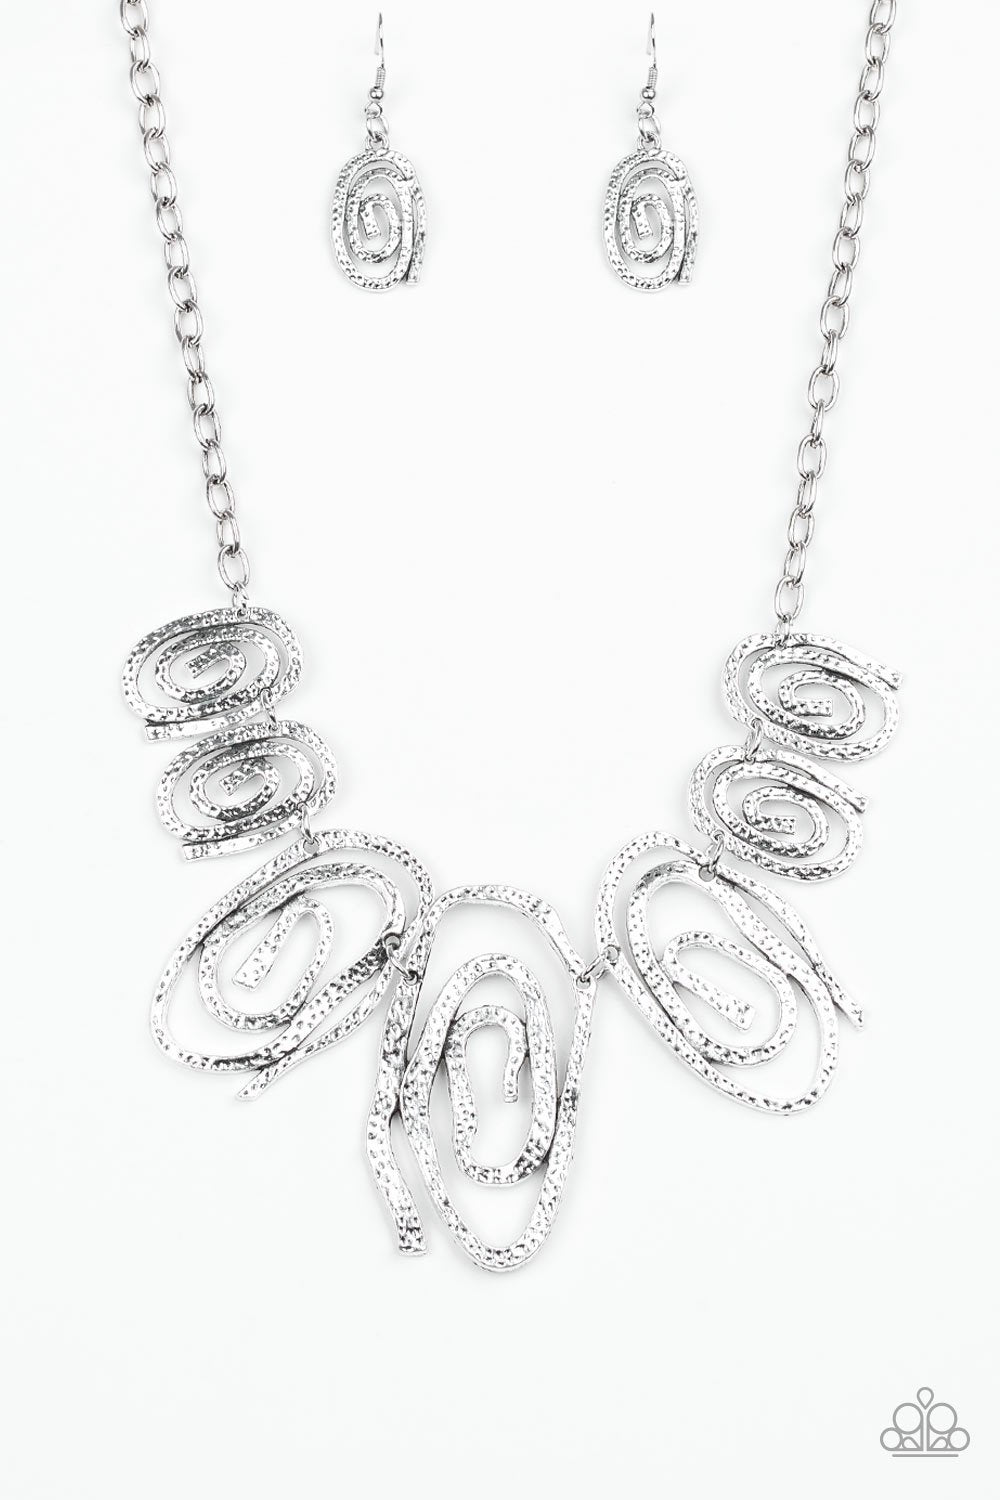 My Cave Is Your Cave Silver Statement Necklace - Paparazzi Accessories-CarasShop.com - $5 Jewelry by Cara Jewels